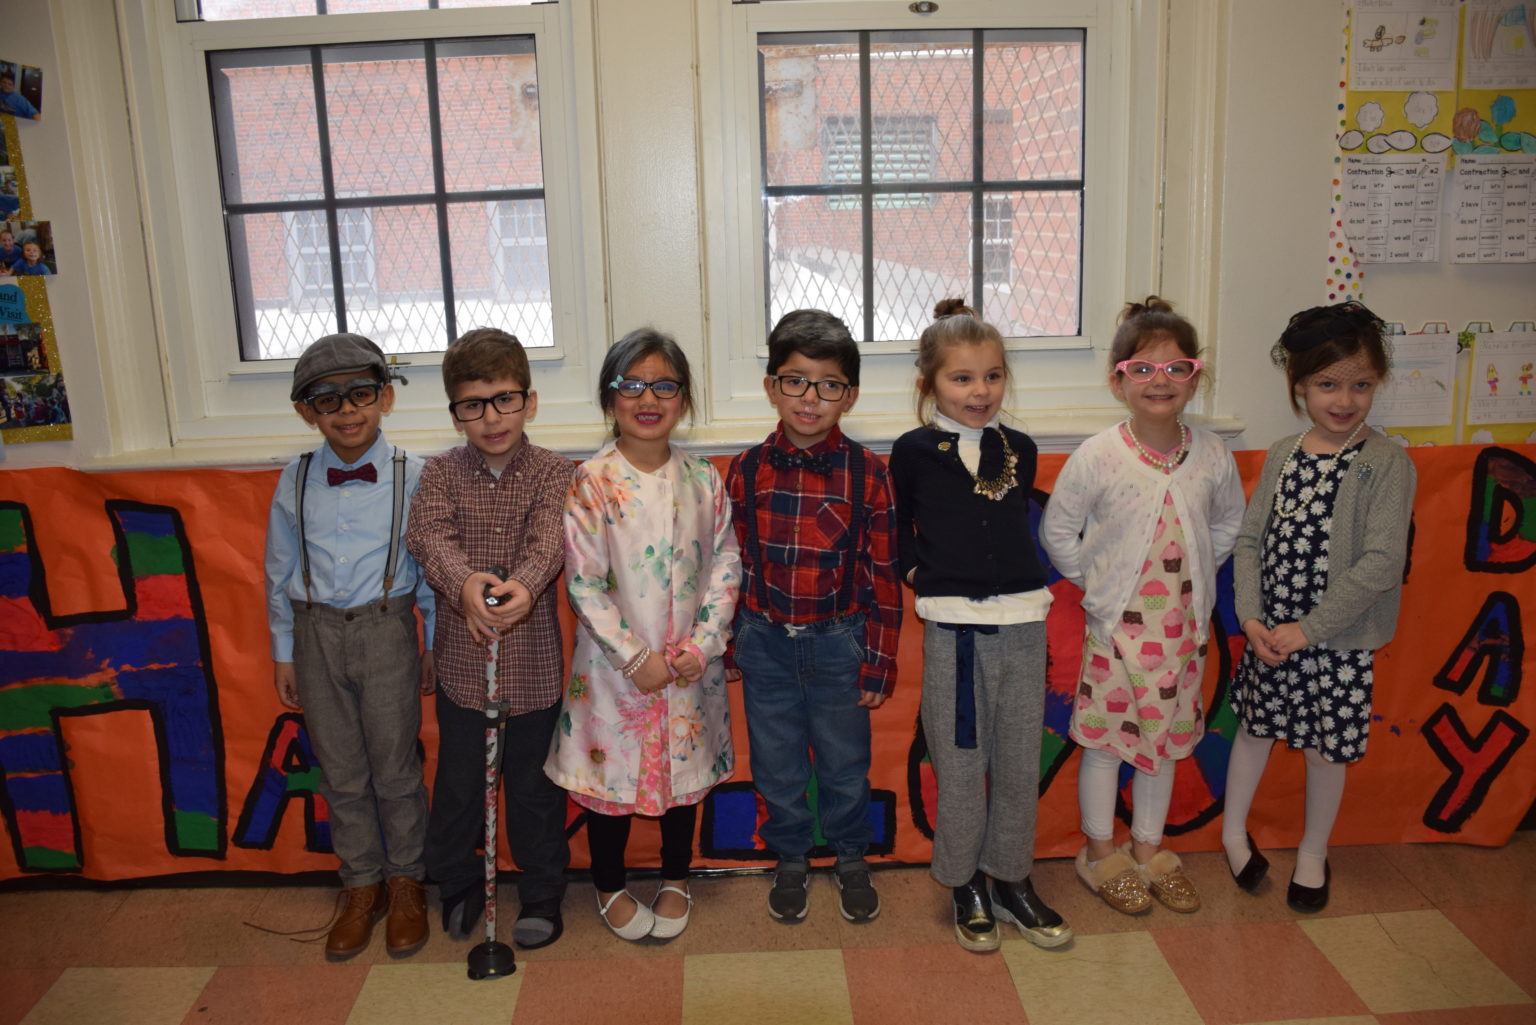 One-hundred days of school at Floral Park-Bellerose - The Island Now